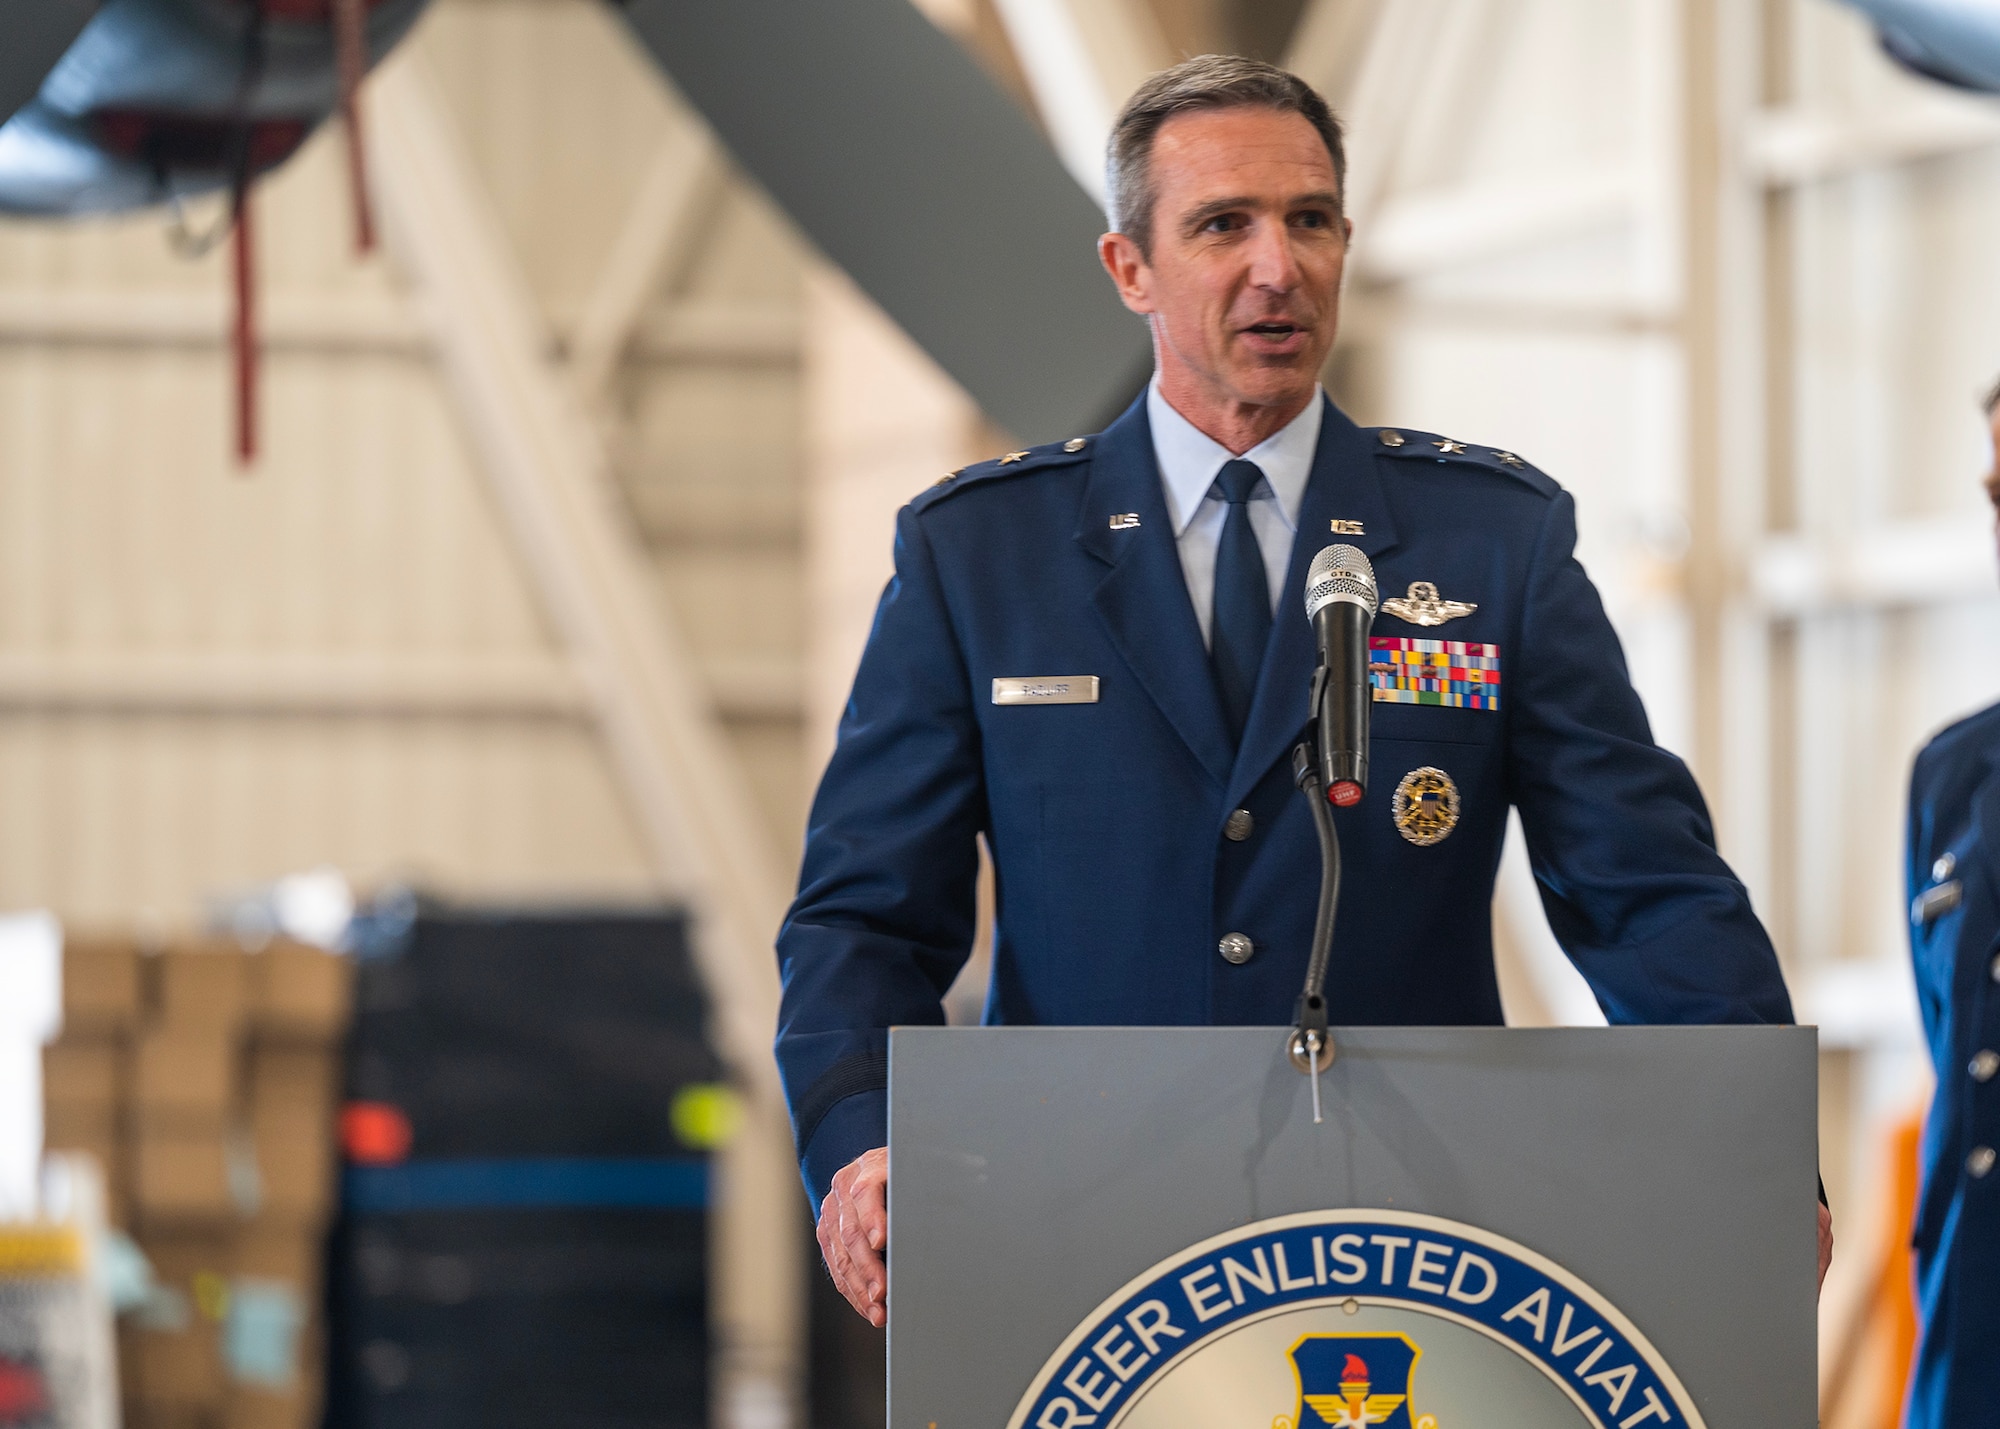 Maj. Gen. Bryan P. Radliff, commander of 10th Air Force, recognizes the accomplishments of the 960th Cyberspace Wing under previous commanders and Col. Richard A. Erredge, and relays his best wishes to Col. Silas V. Darden in his role as the new wing commander at Joint Base San Antonio-Lackland, Texas on May 7, 2023. (U.S. Air
Force photo by Brian Boisvert)